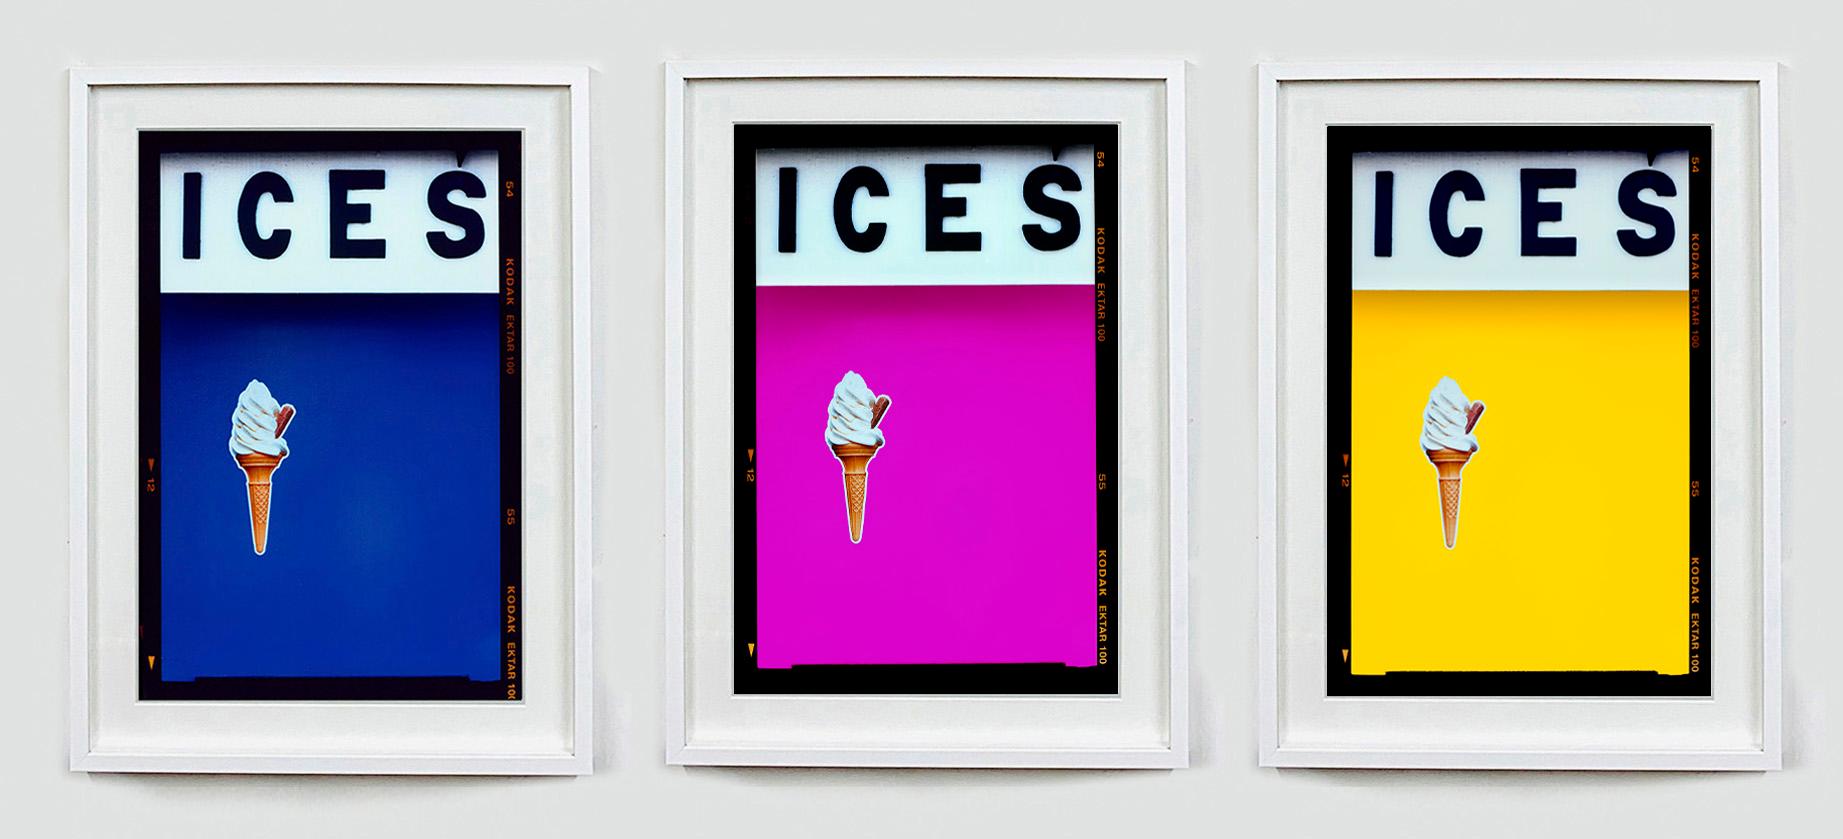 ICES Blue, Pink and Yellow
A set of three pop art prints by Richard Heeps from his Great British Staycation series 'On-Sea'.
Taken between lockdowns in September 2020, it has proved to be one of Richard's all time bestselling artworks. The bold